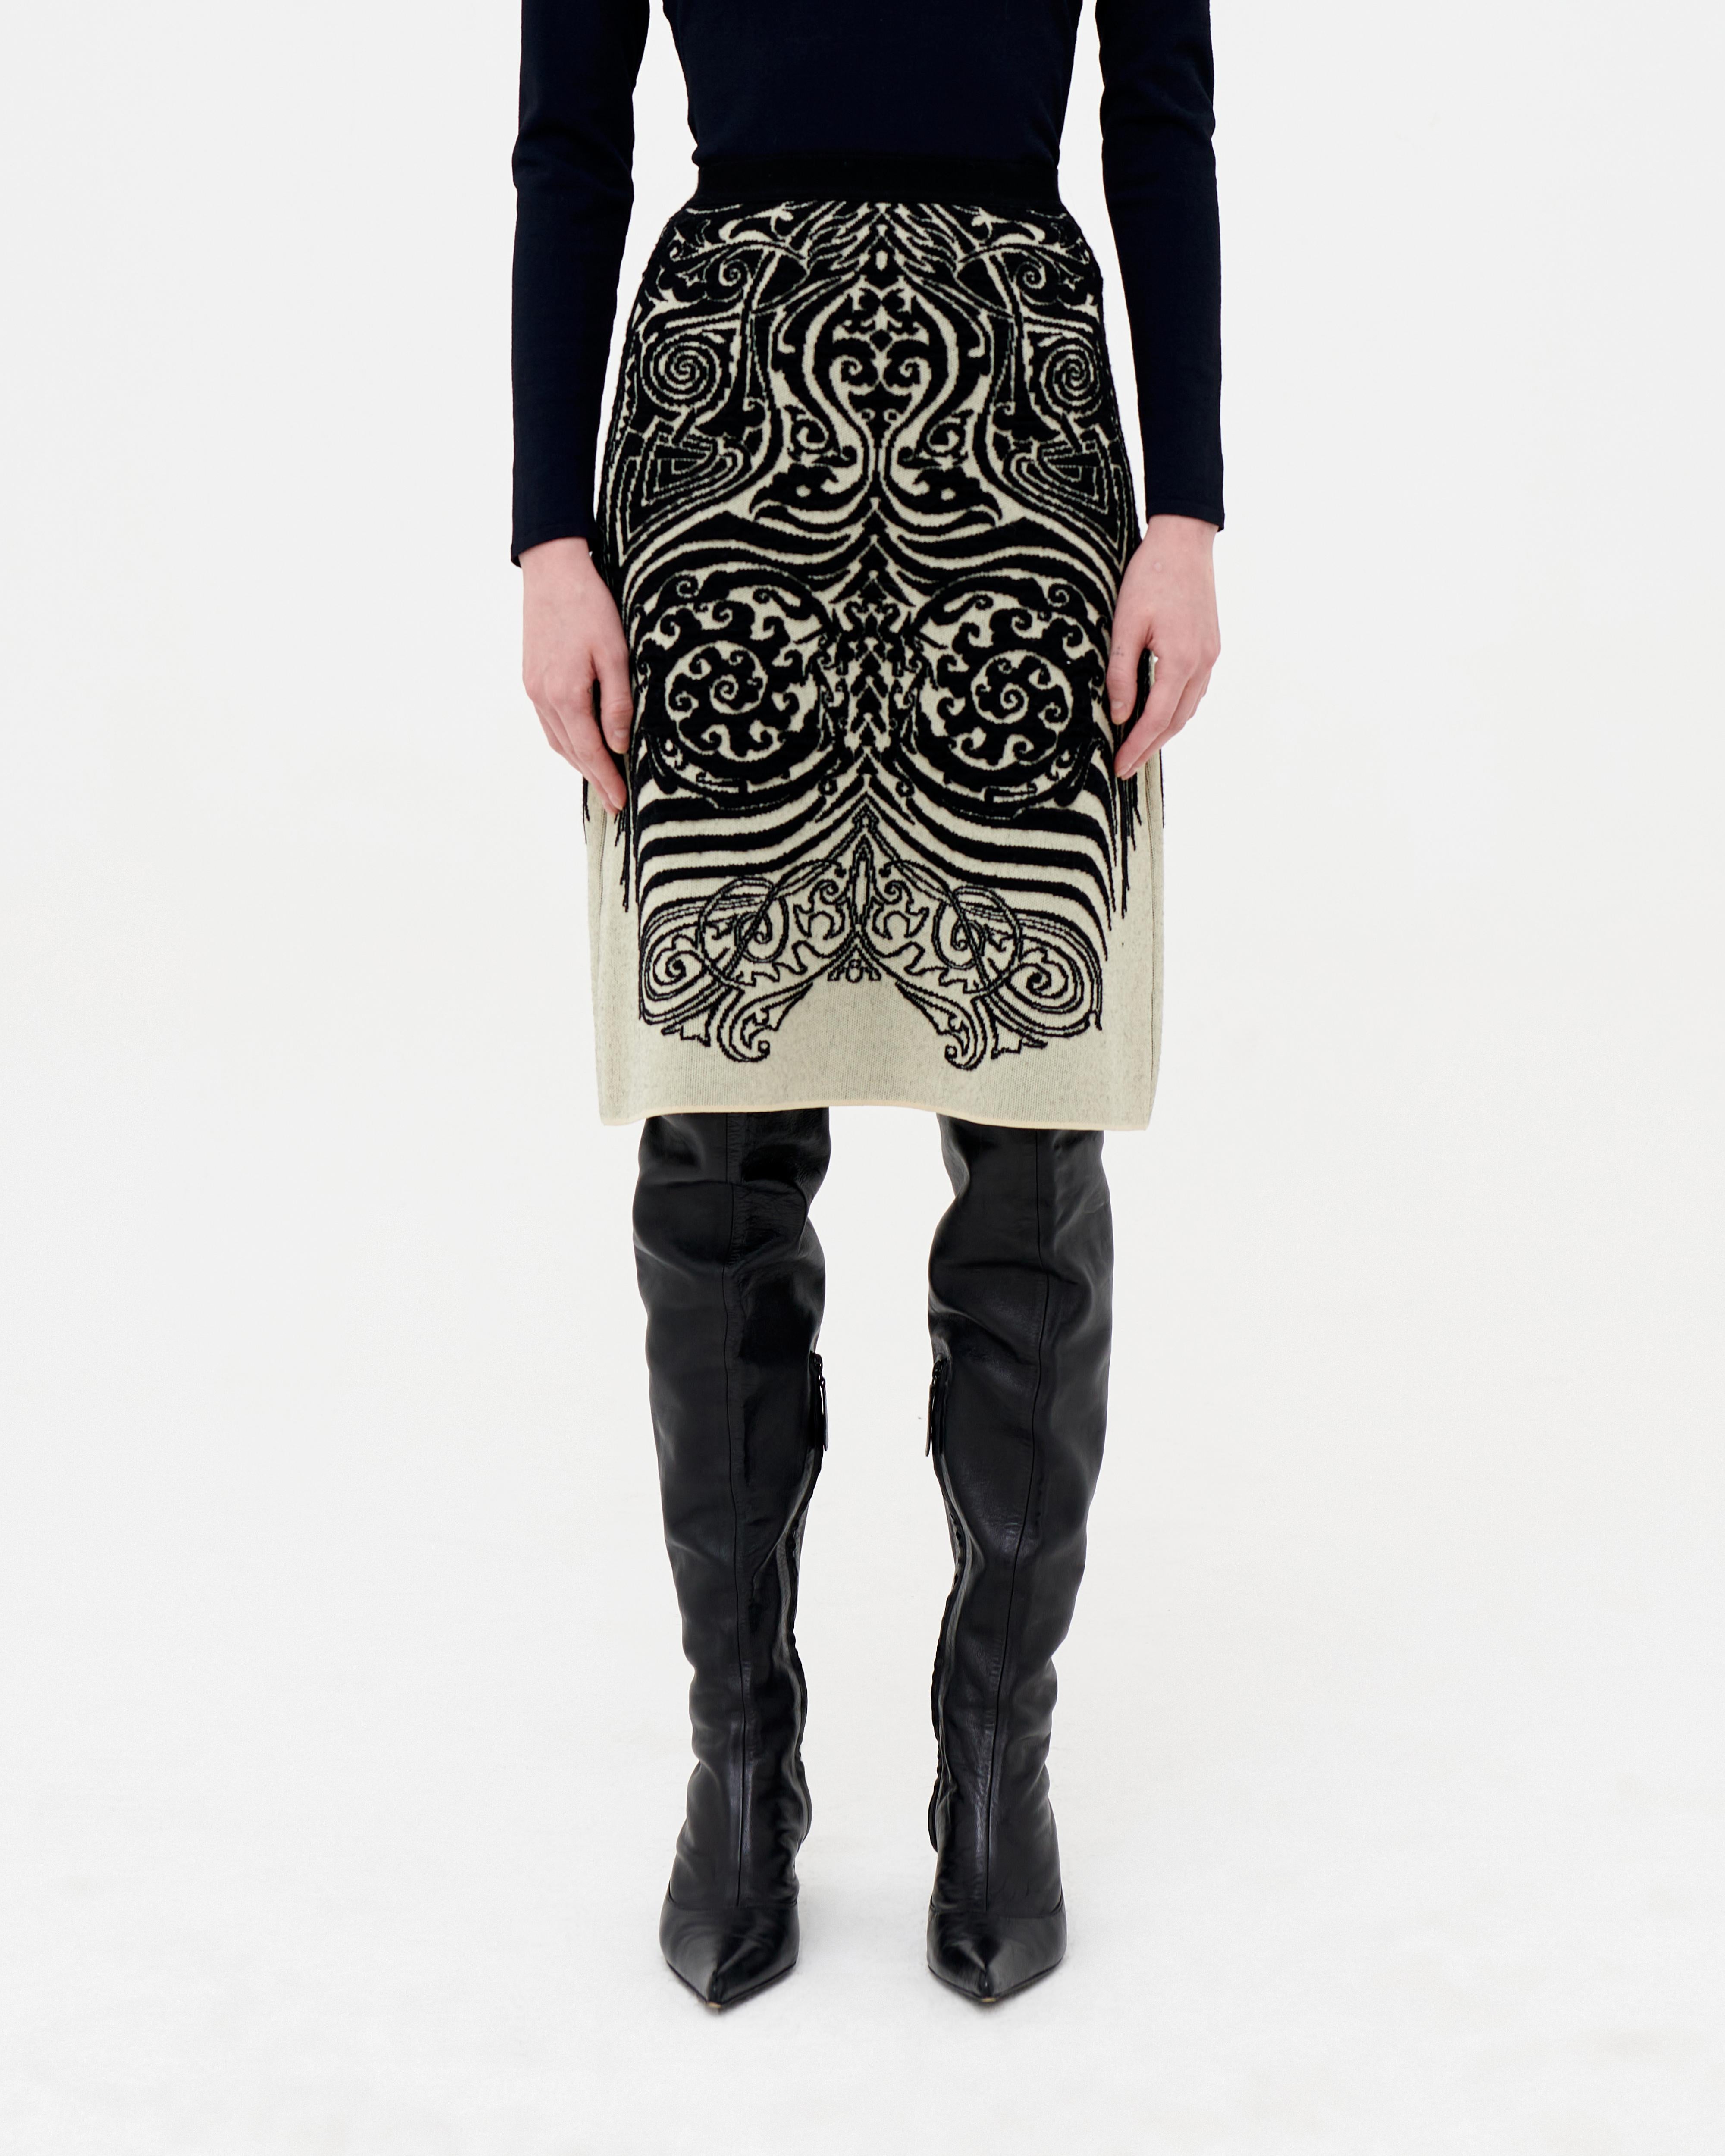 Jean Paul Gaultier mid-length pencil skirt featuring the iconic Tribal Dragon print from the Cyberbaba S/S 96 collection.

85% Wool 15% Polyamide

Size XS

Waist: 54 cm / 21,2 inches 
Length: 60,5 cm / 23,8 inches 
